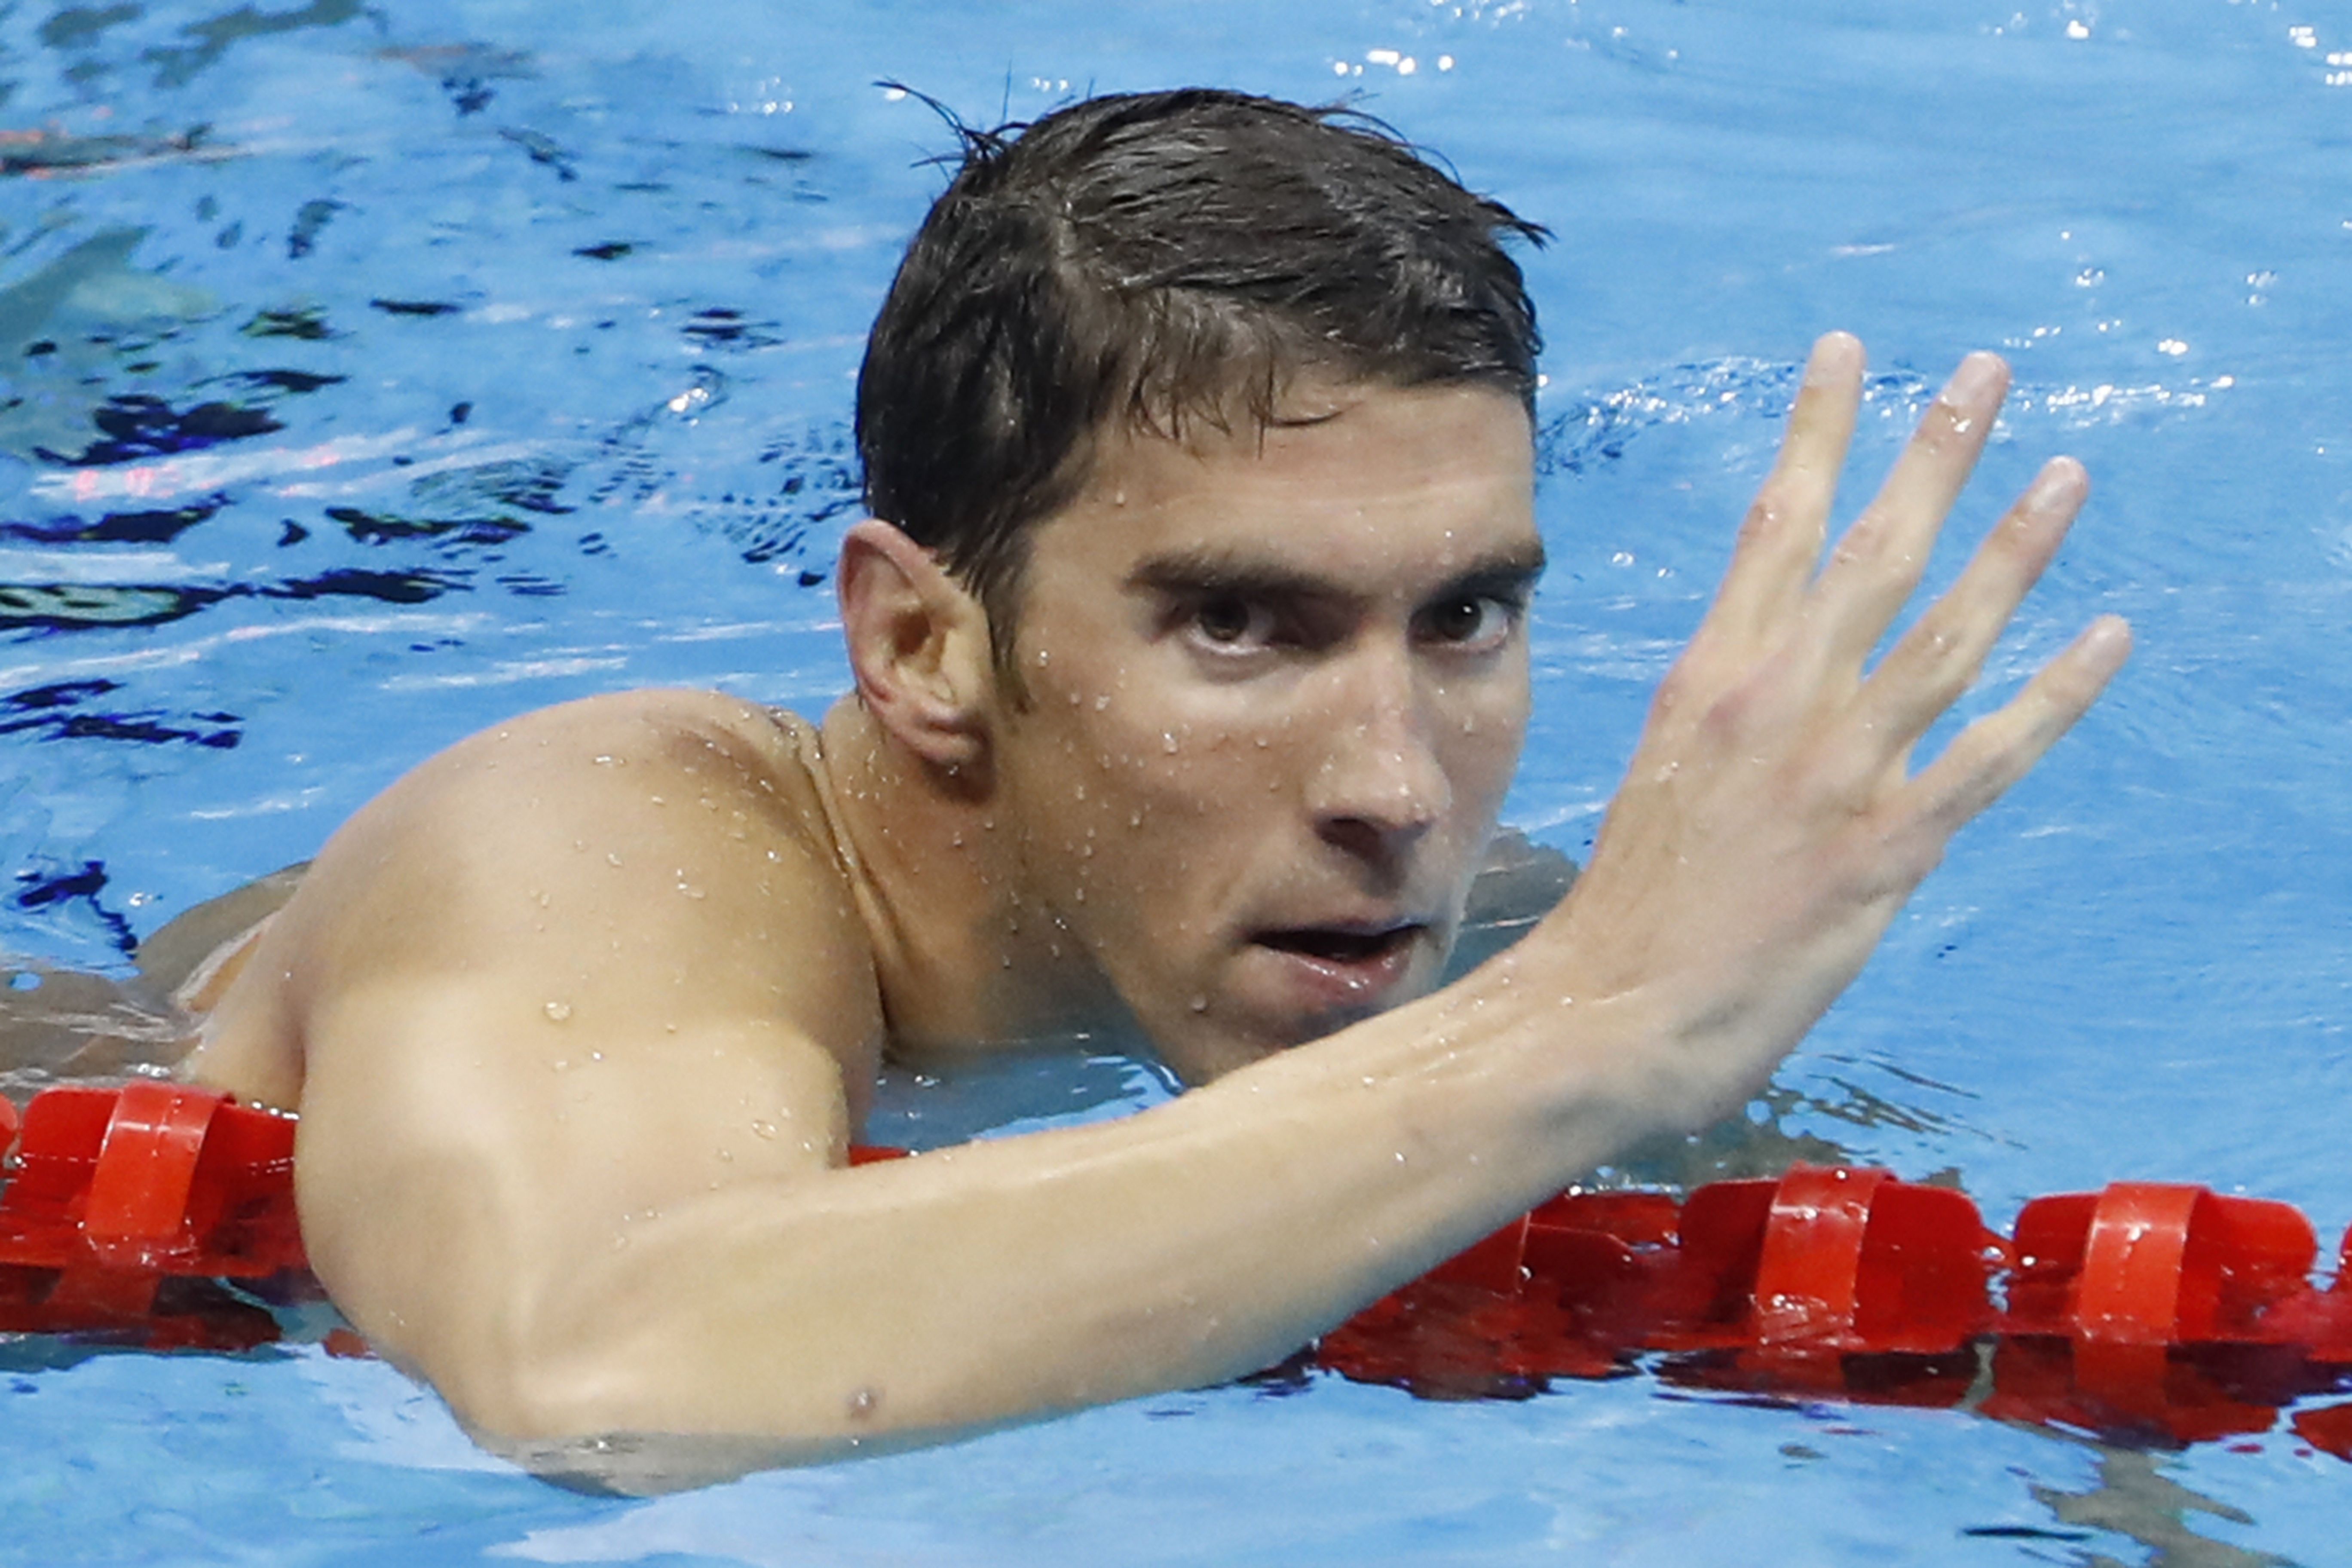 Michael Phelps celebrates his fourth gold medal with a hand gesture after his victory in the Men's 200m Individual Medley Final at the Rio 2016 Olympic Games | Source: Getty Images